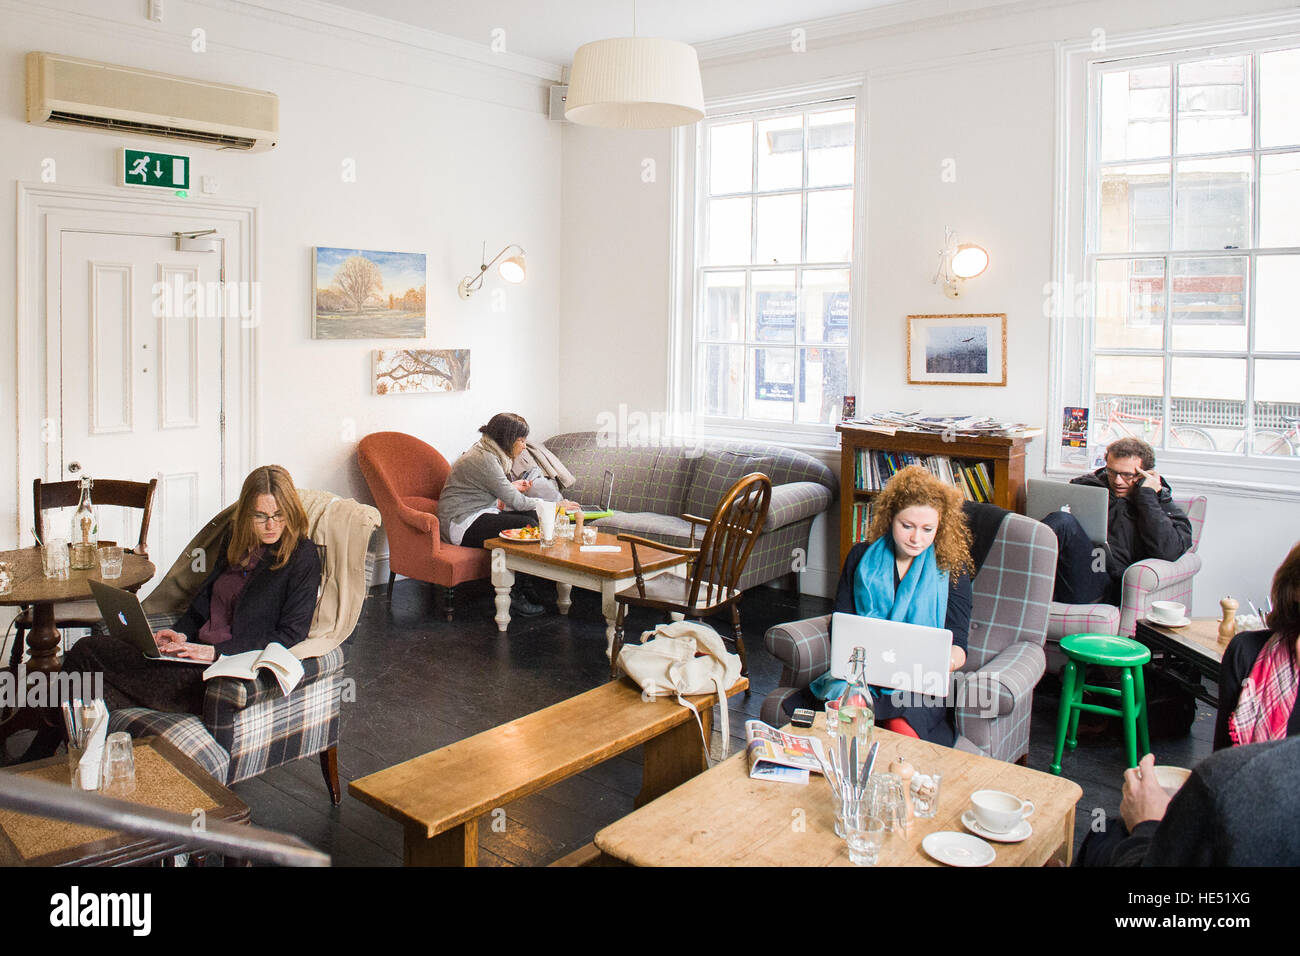 Young people relaxing and working in Turl Street Cafe- a bright airy cafe Stock Photo